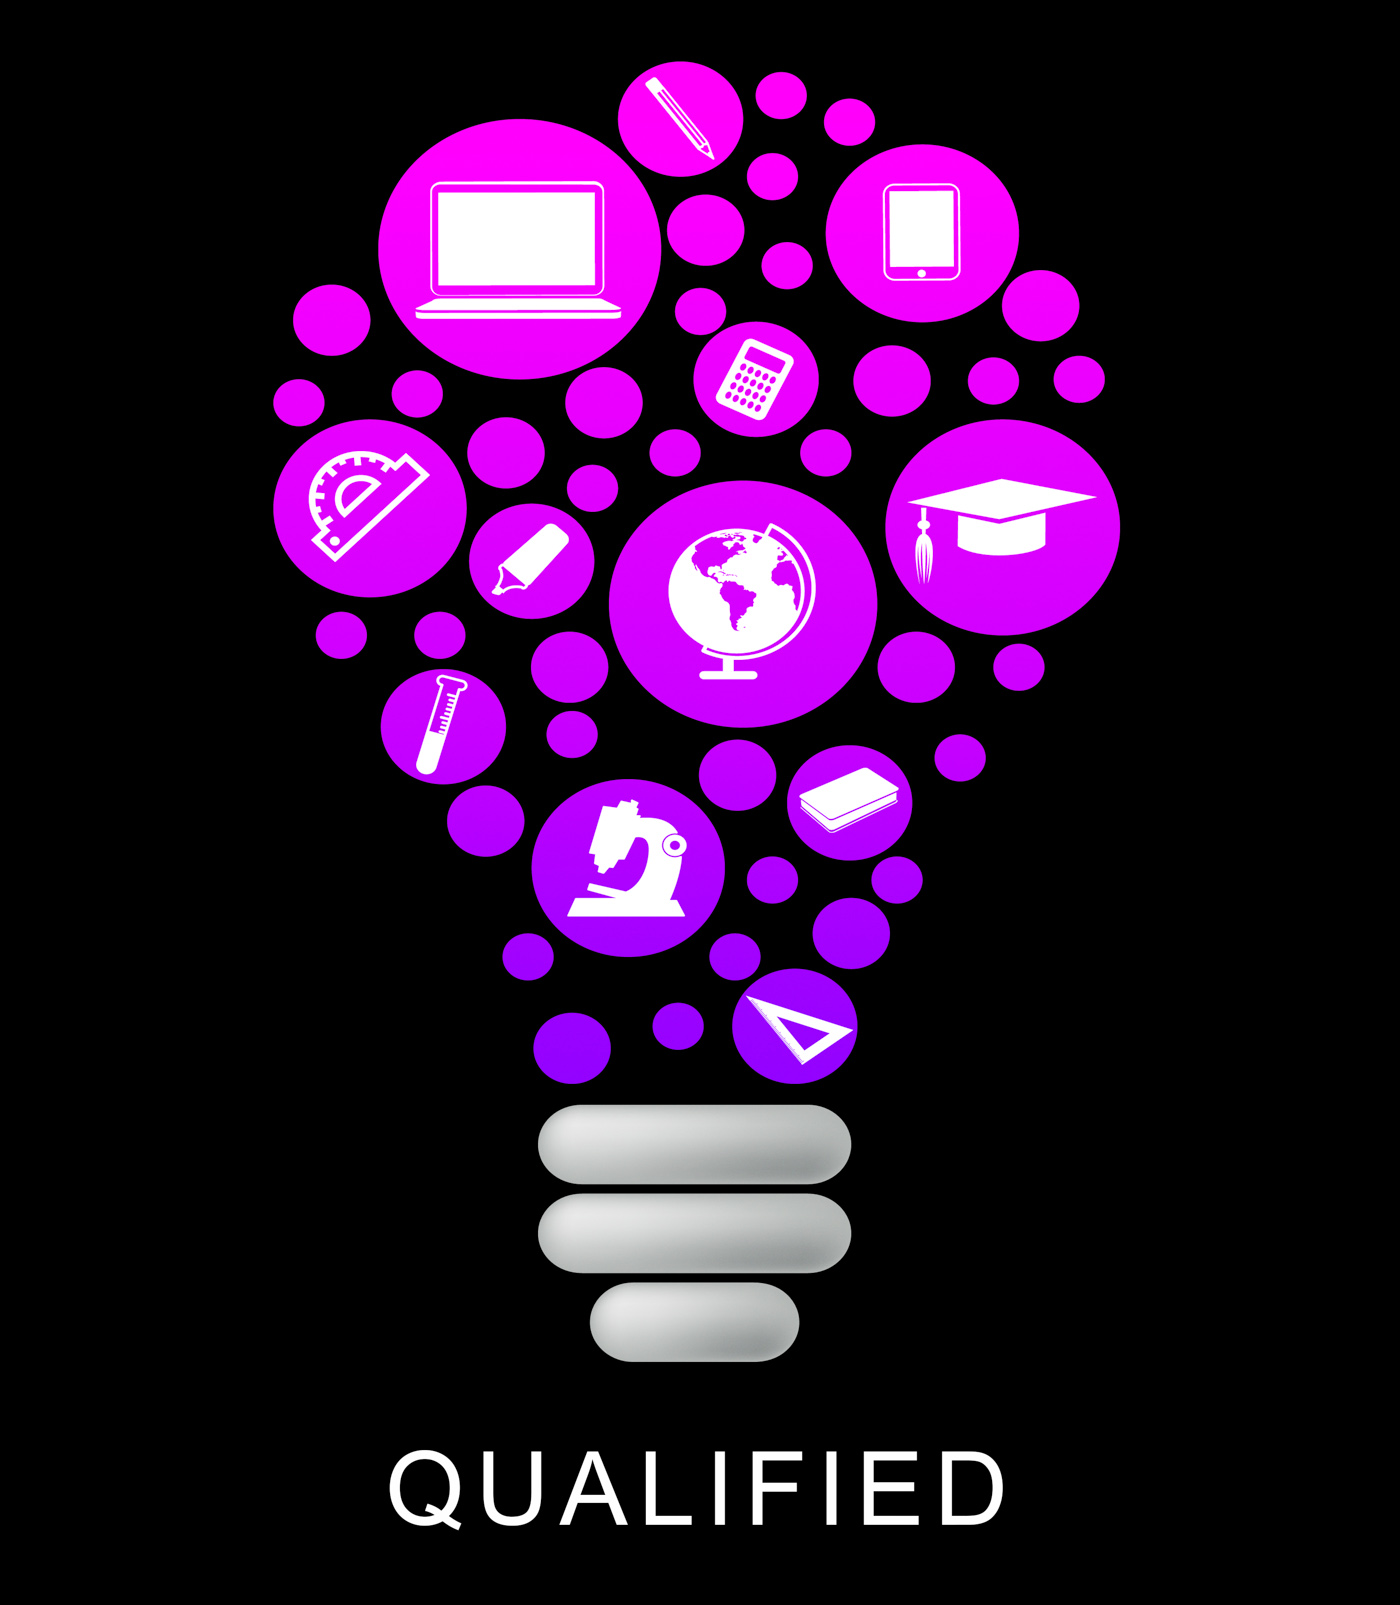 Qualified lightbulb represents proficient qualifications and skilful photo